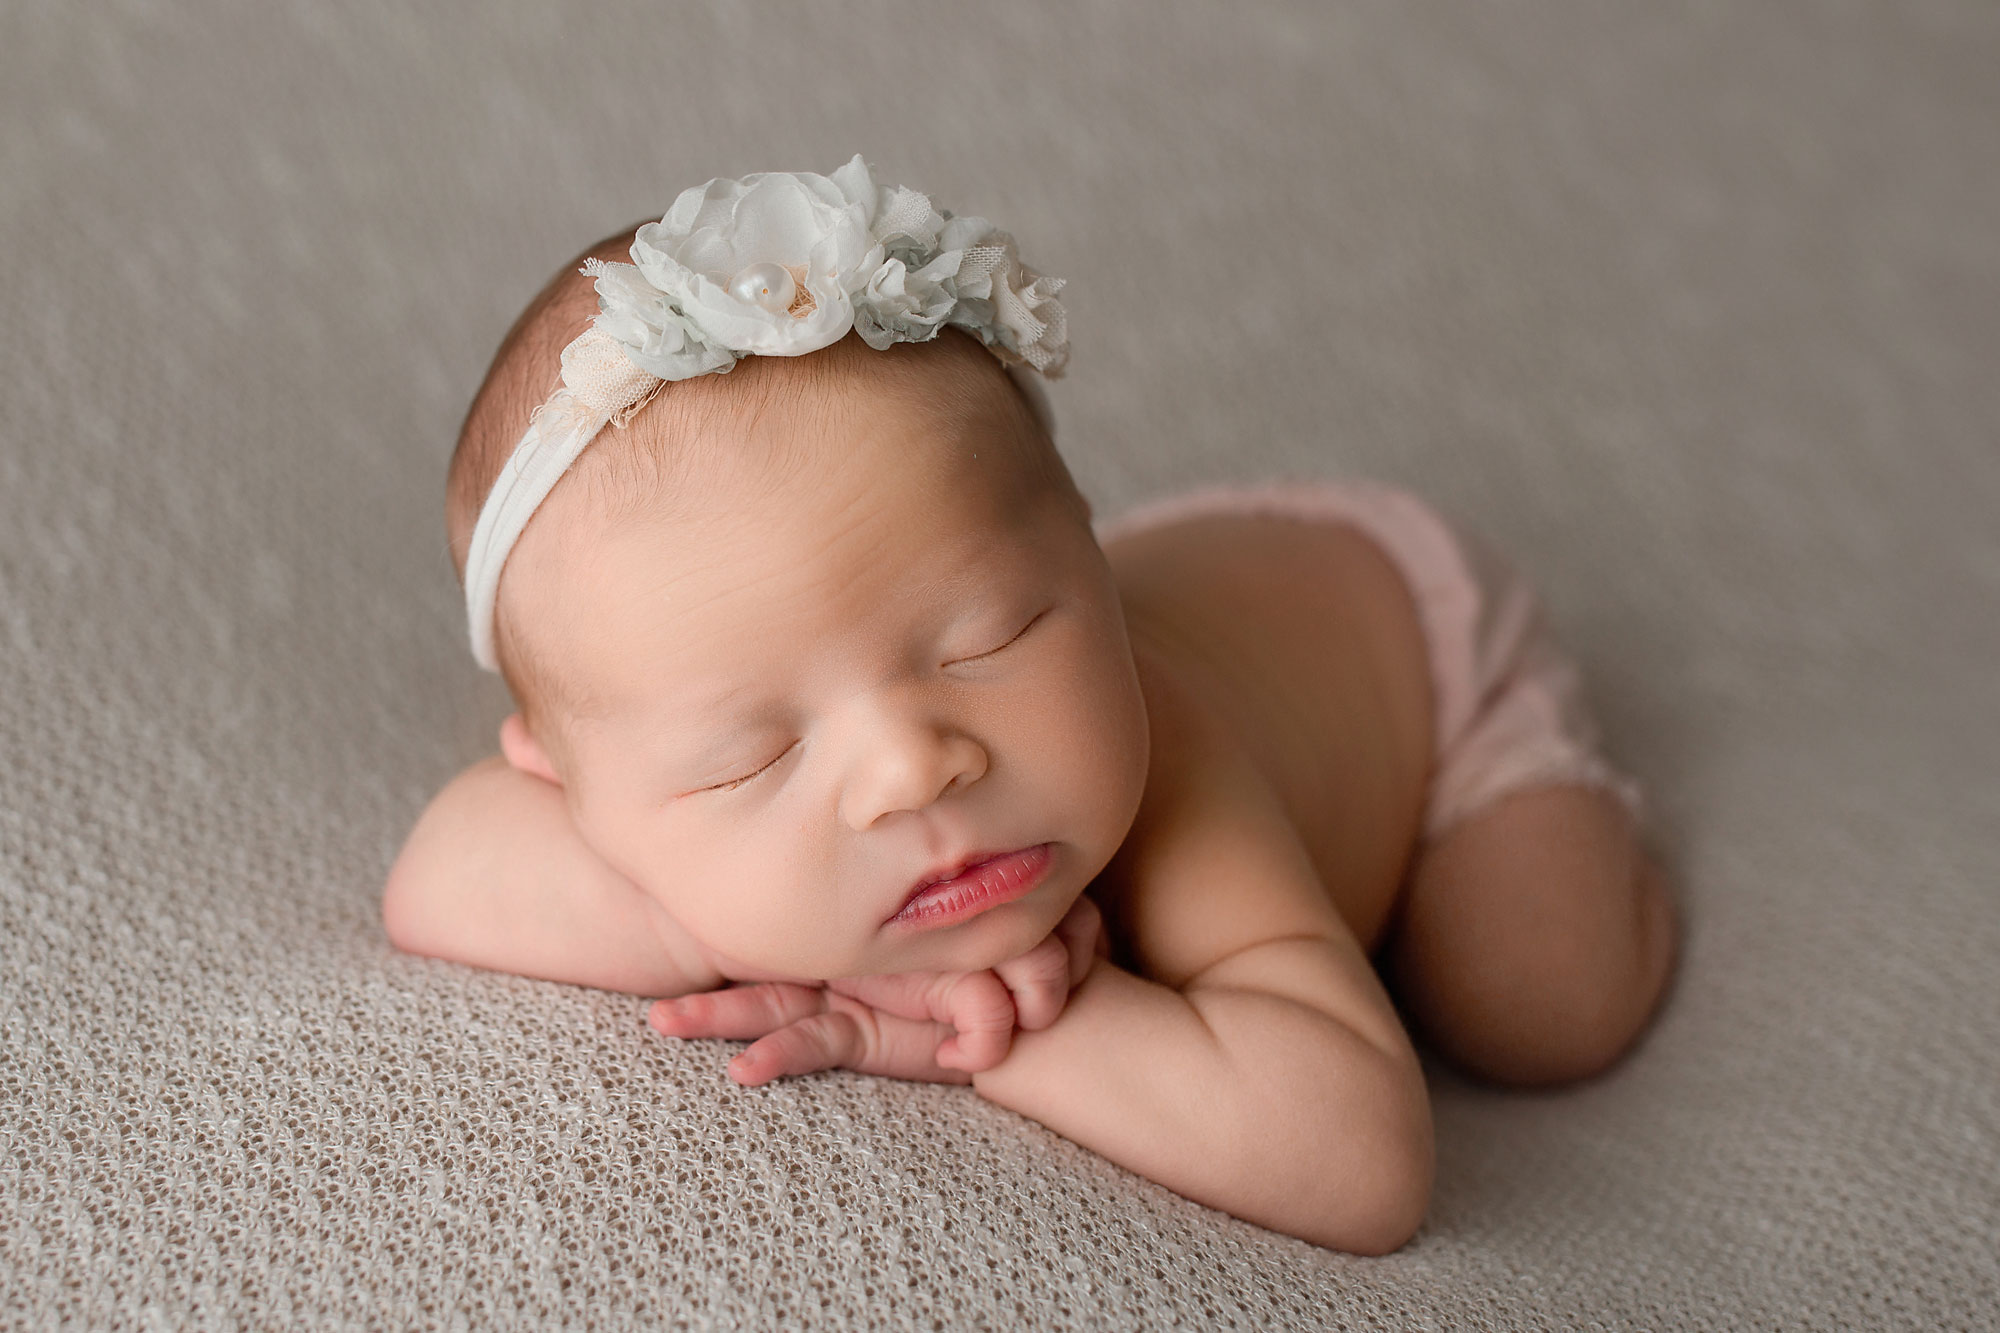 Bedminster NJ Baby Photography Session